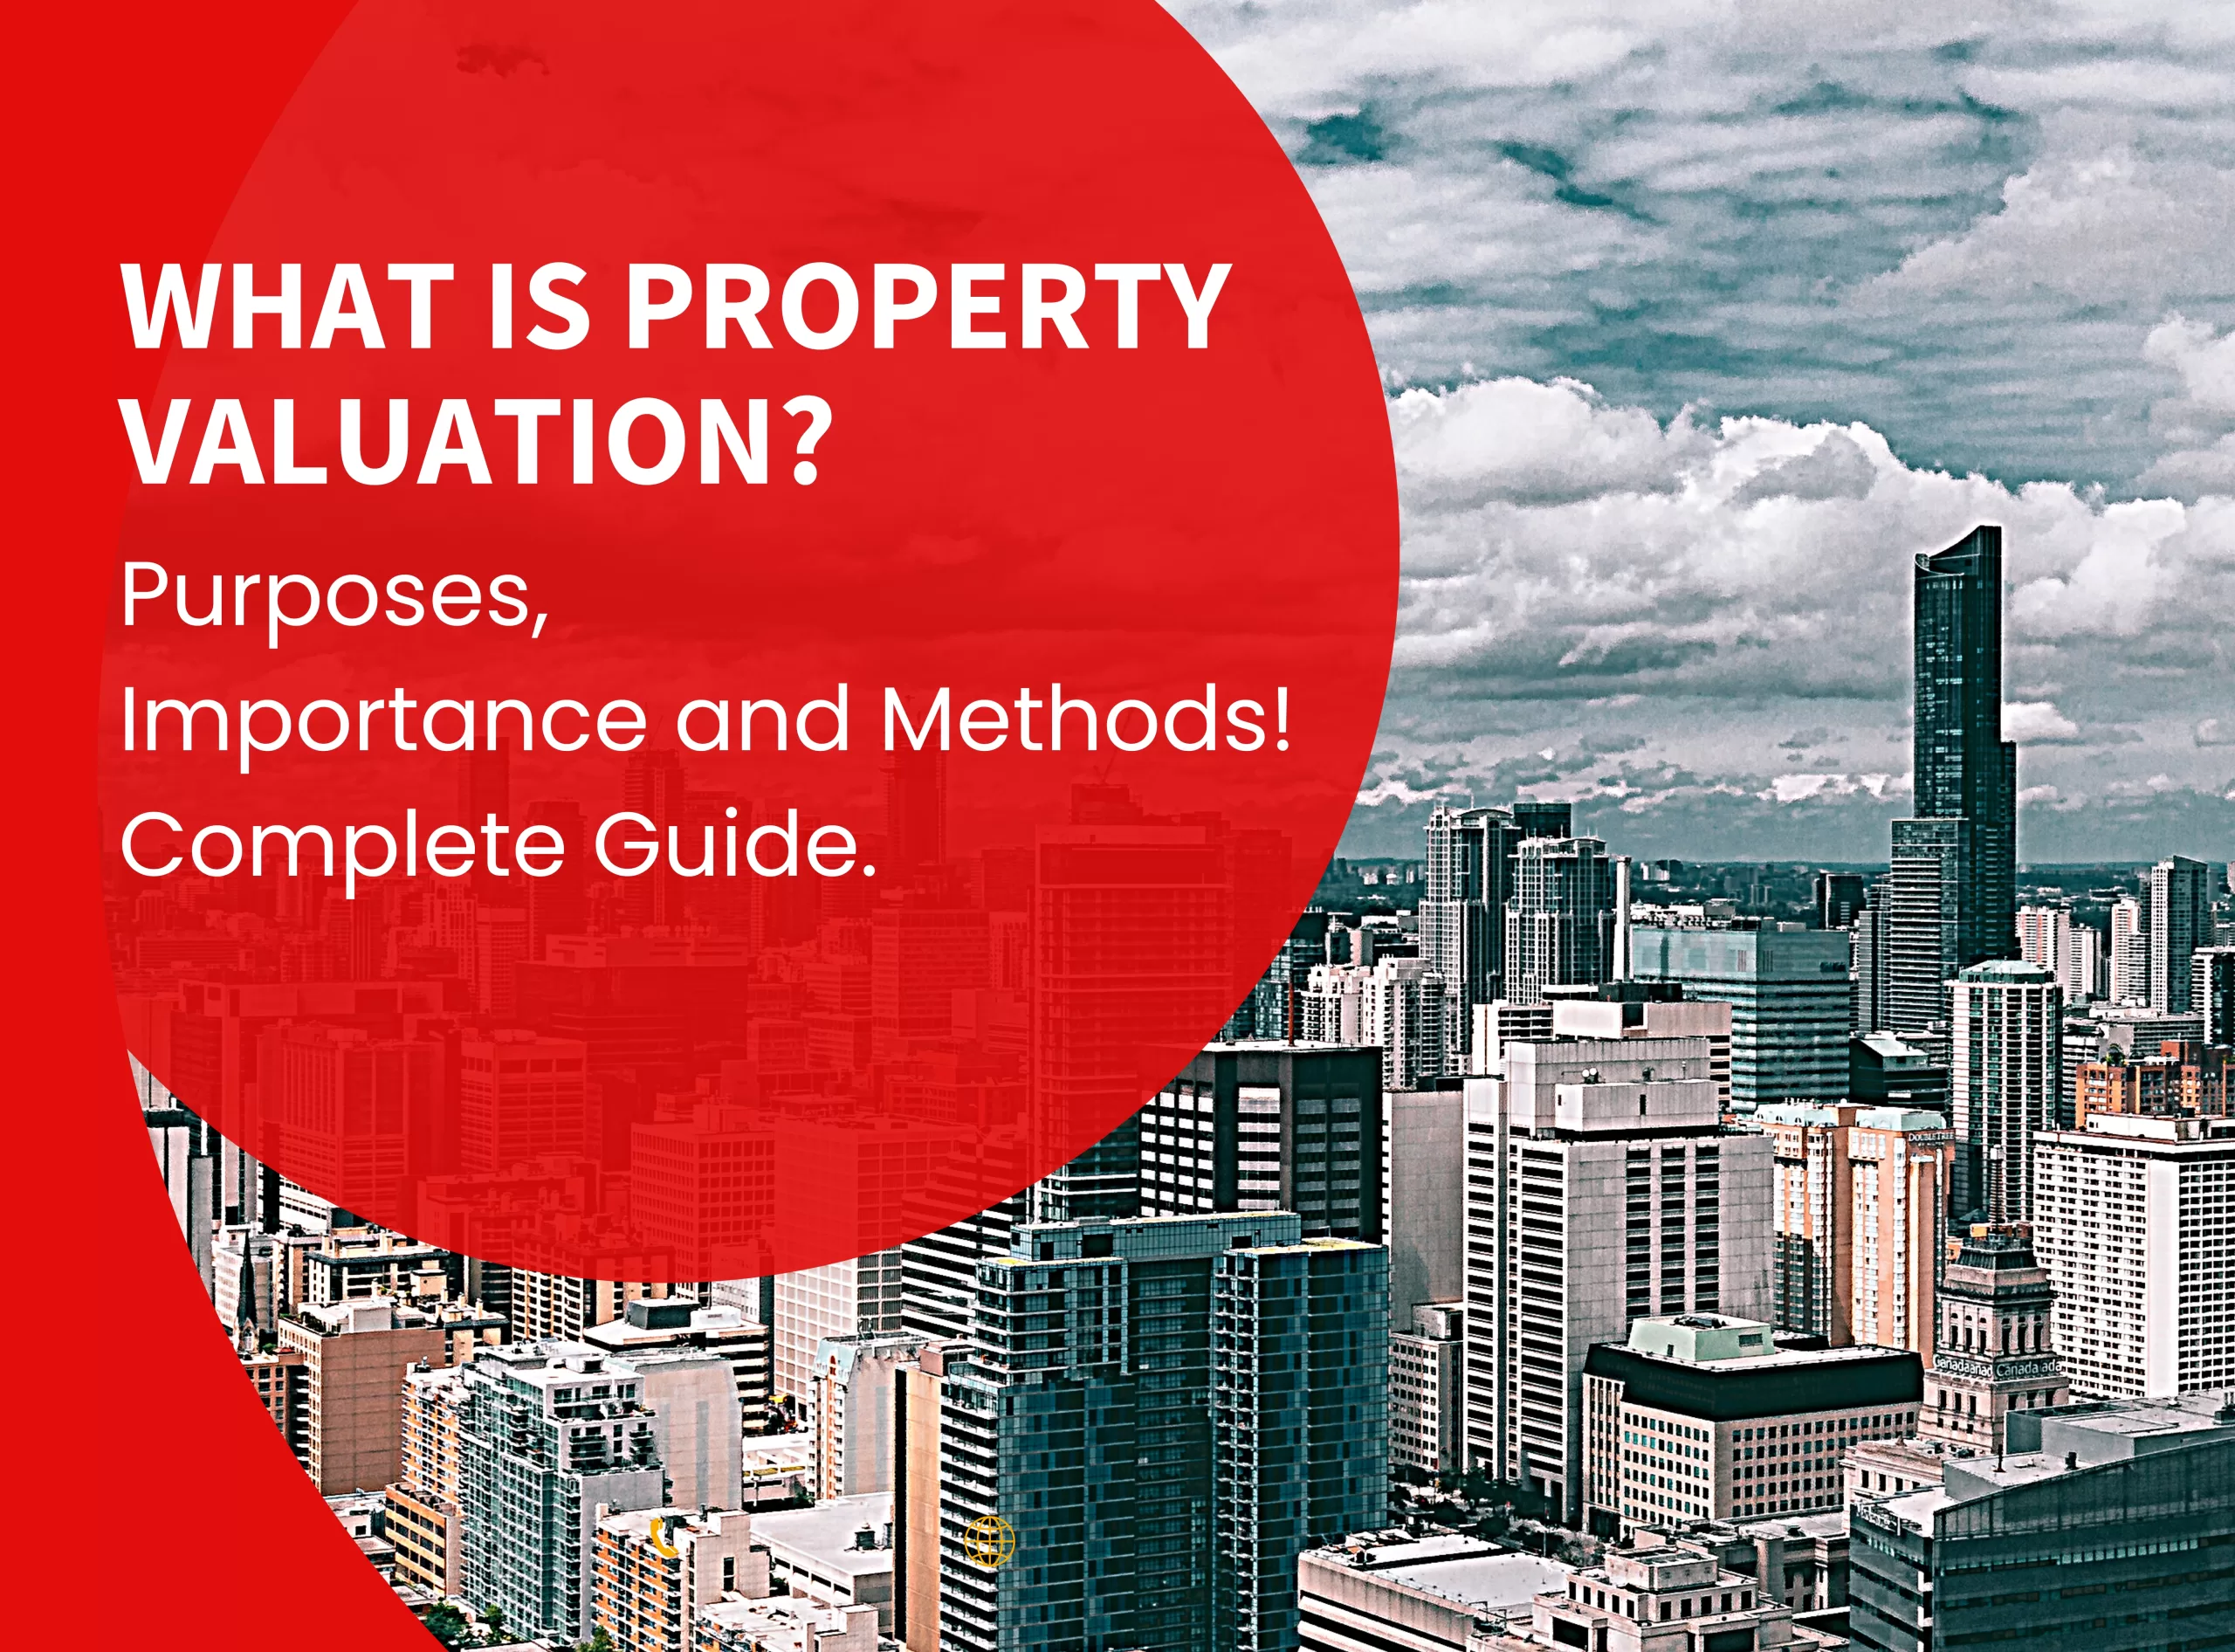 Property Valuation? defination, Purposes, Importance and Methods!